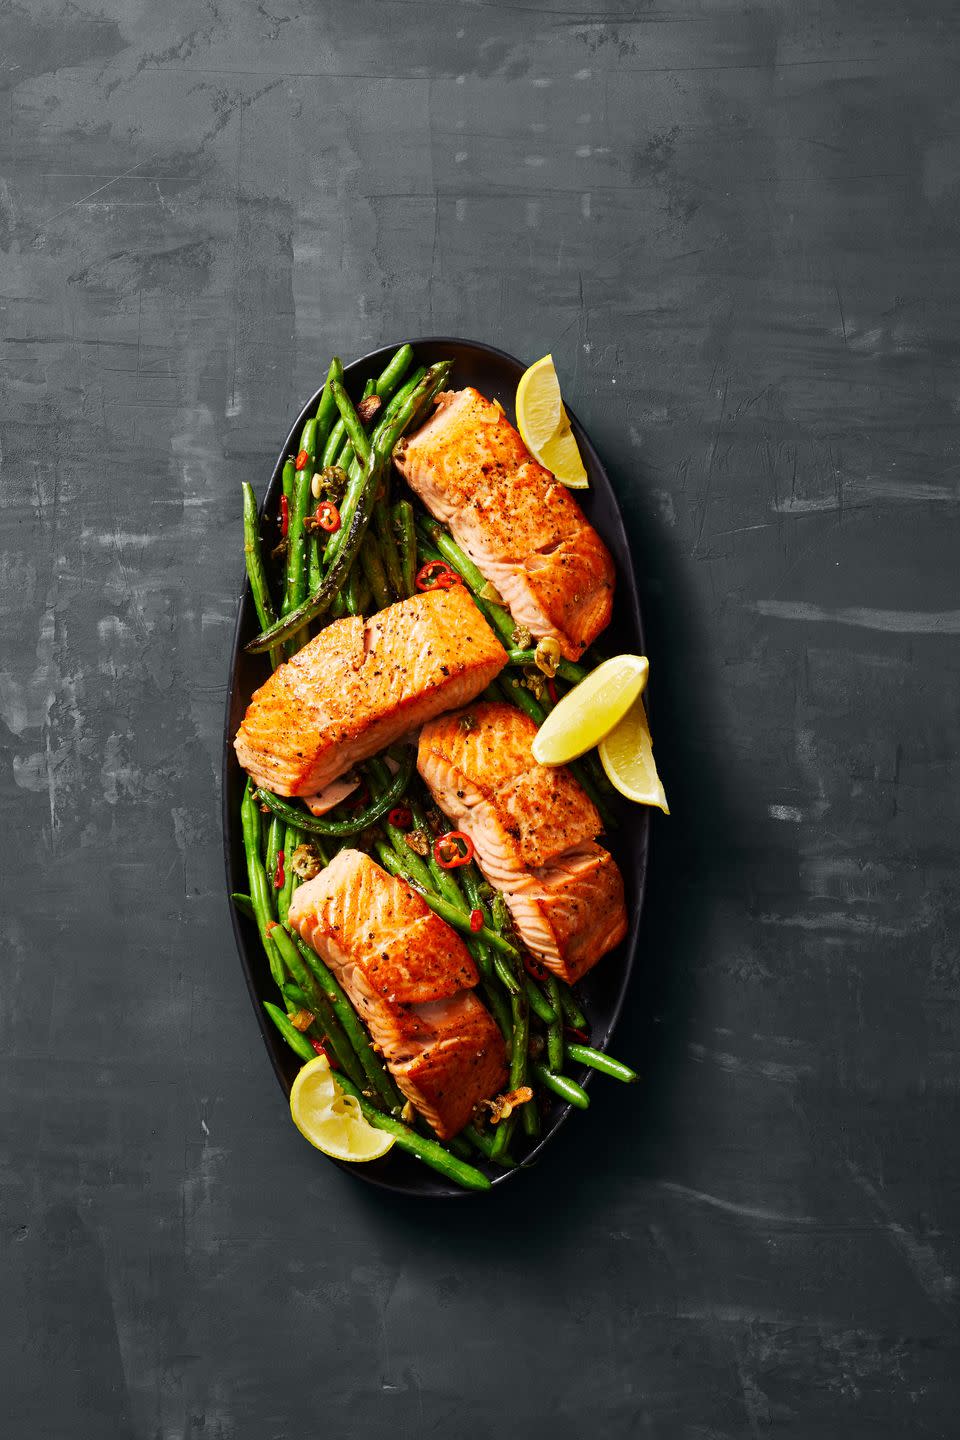 <p>Here's what you need for this recipe: salmon, green beans, garlic, capers and red chile. That's it!</p><p>Get the <strong><a href="https://www.goodhousekeeping.com/food-recipes/a38540033/seared-salmon-with-charred-green-beans-recipe/" rel="nofollow noopener" target="_blank" data-ylk="slk:Seared Salmon with Charred Green Beans recipe" class="link ">Seared Salmon with Charred Green Beans recipe</a></strong>. </p><p><strong>RELATED: </strong><a href="https://www.goodhousekeeping.com/health/diet-nutrition/g4905/health-benefits-of-salmon/" rel="nofollow noopener" target="_blank" data-ylk="slk:11 Surprising Health Benefits of Salmon" class="link ">11 Surprising Health Benefits of Salmon</a><br></p>